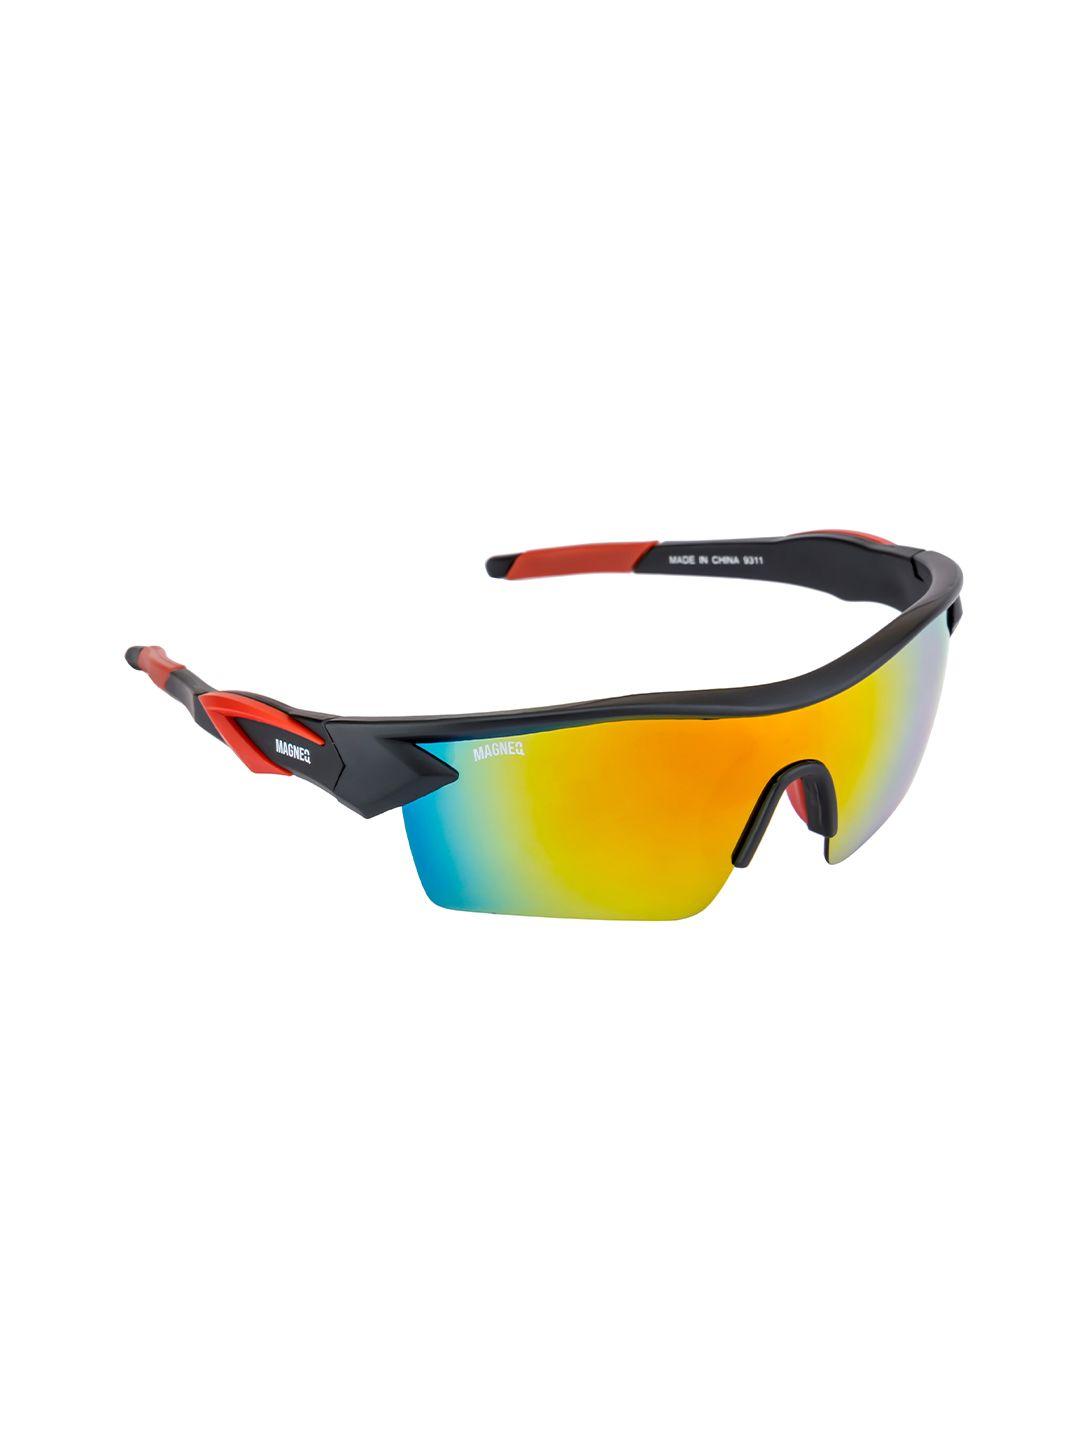 magneq sports sunglasses with uv protected lens mg 9311/s c7 6617